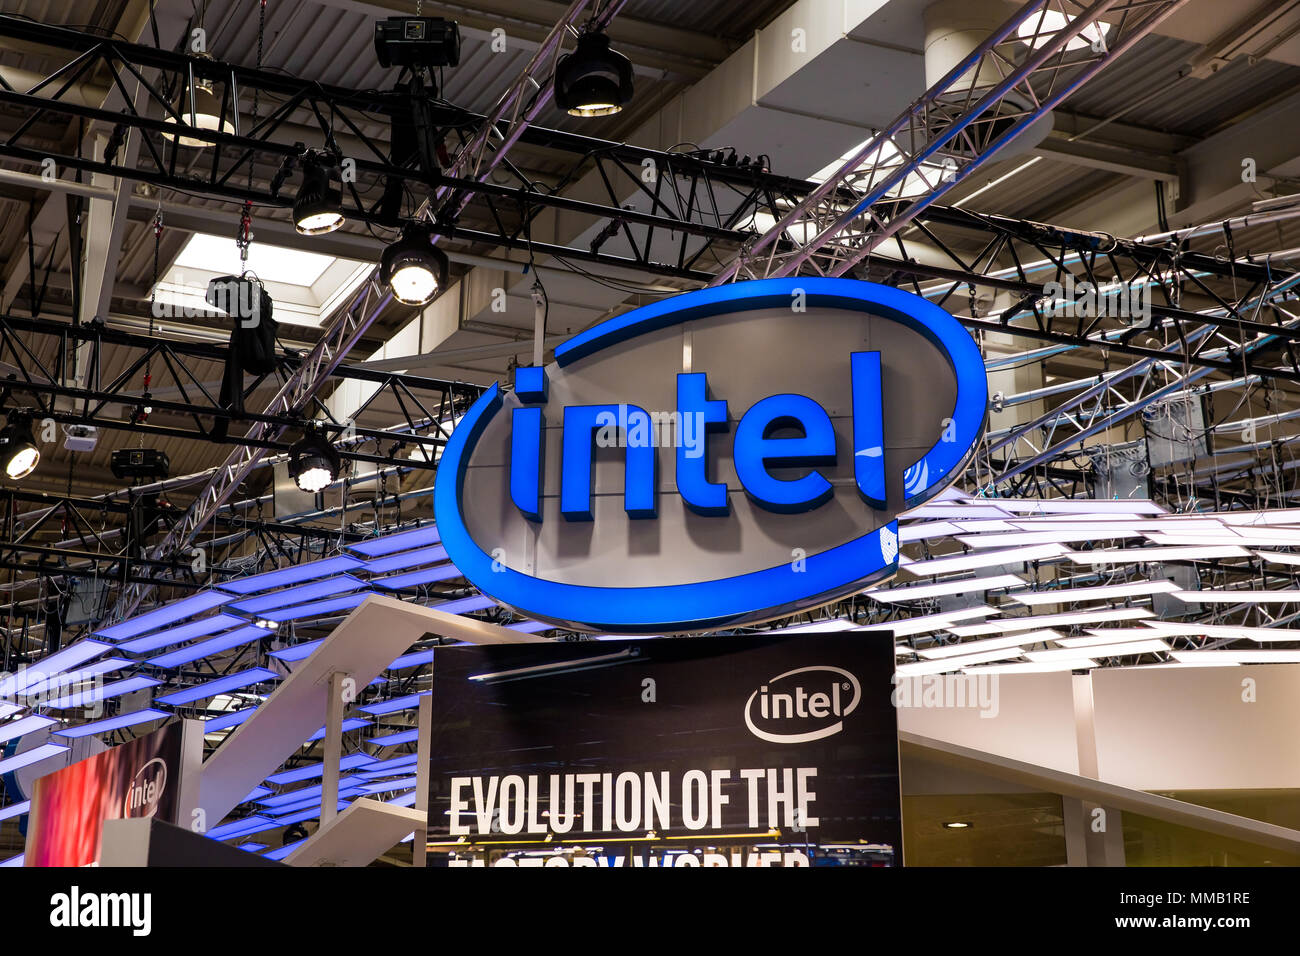 Hannover, Germany - April, 2018: Intel logo sign on booth stand on Messe fair in Hannover, Germany Stock Photo